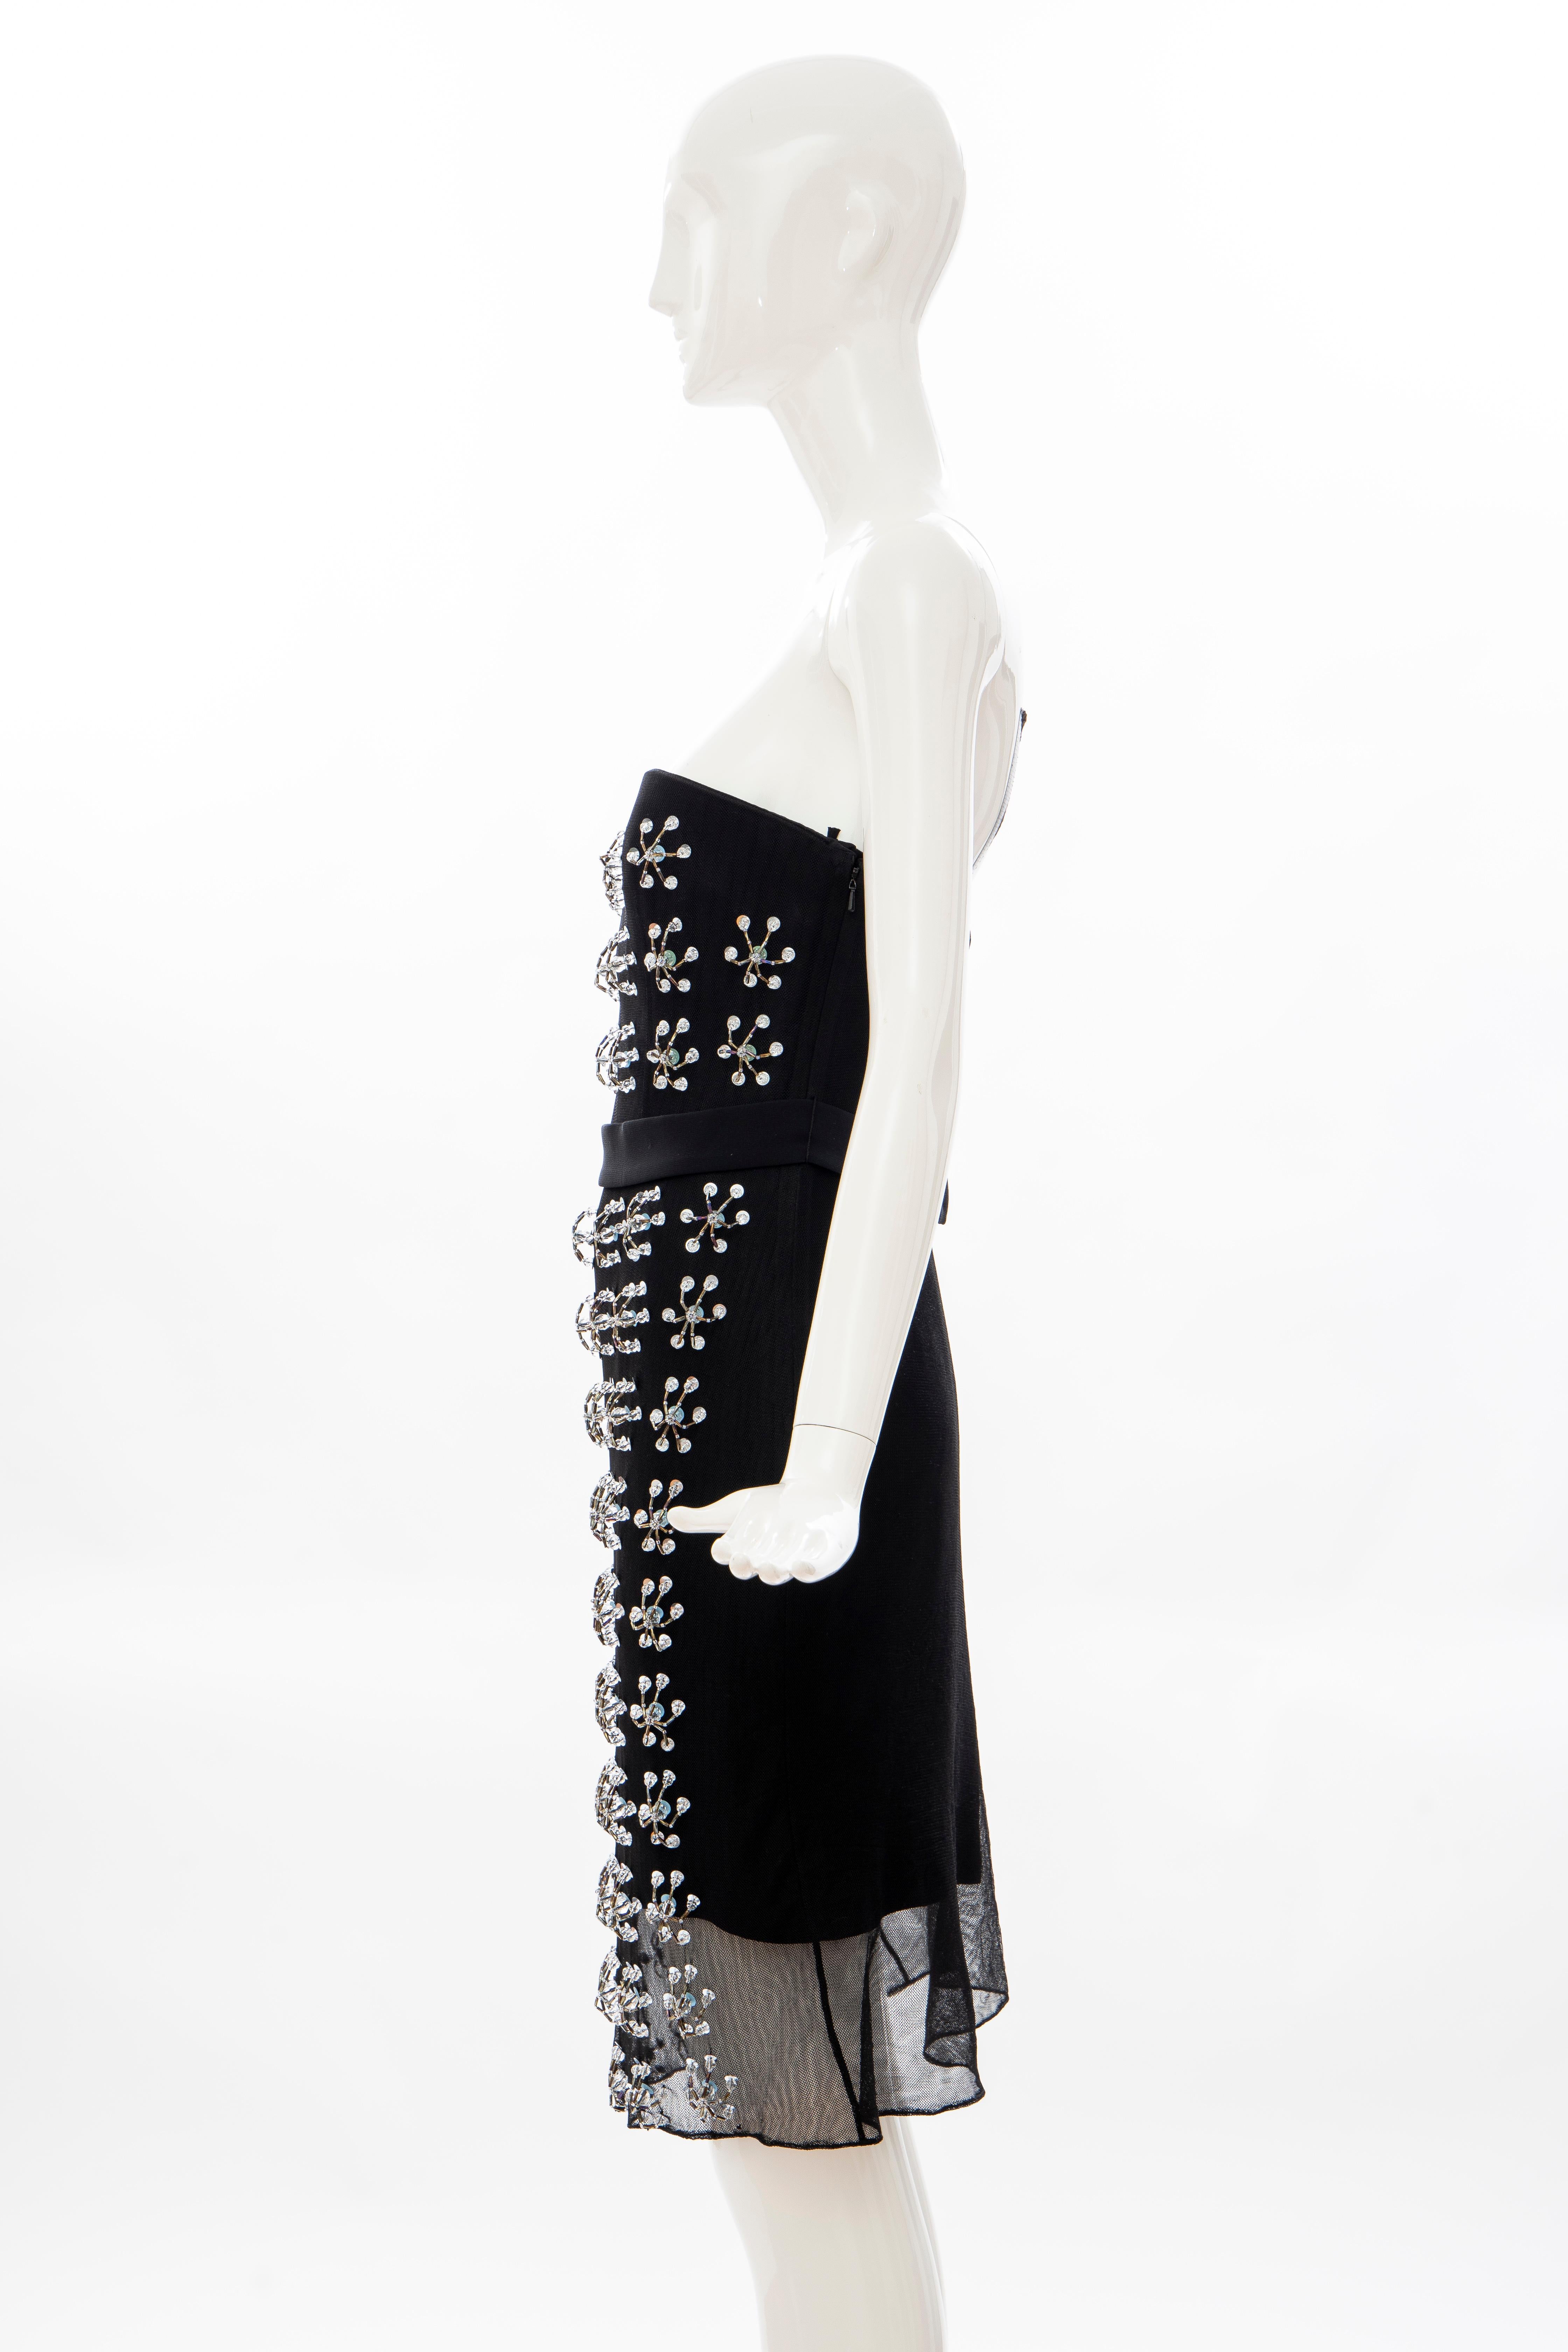 Raf Simons for Christian Dior Runway Strapless Embroidered Dress, Spring 2013 For Sale 1